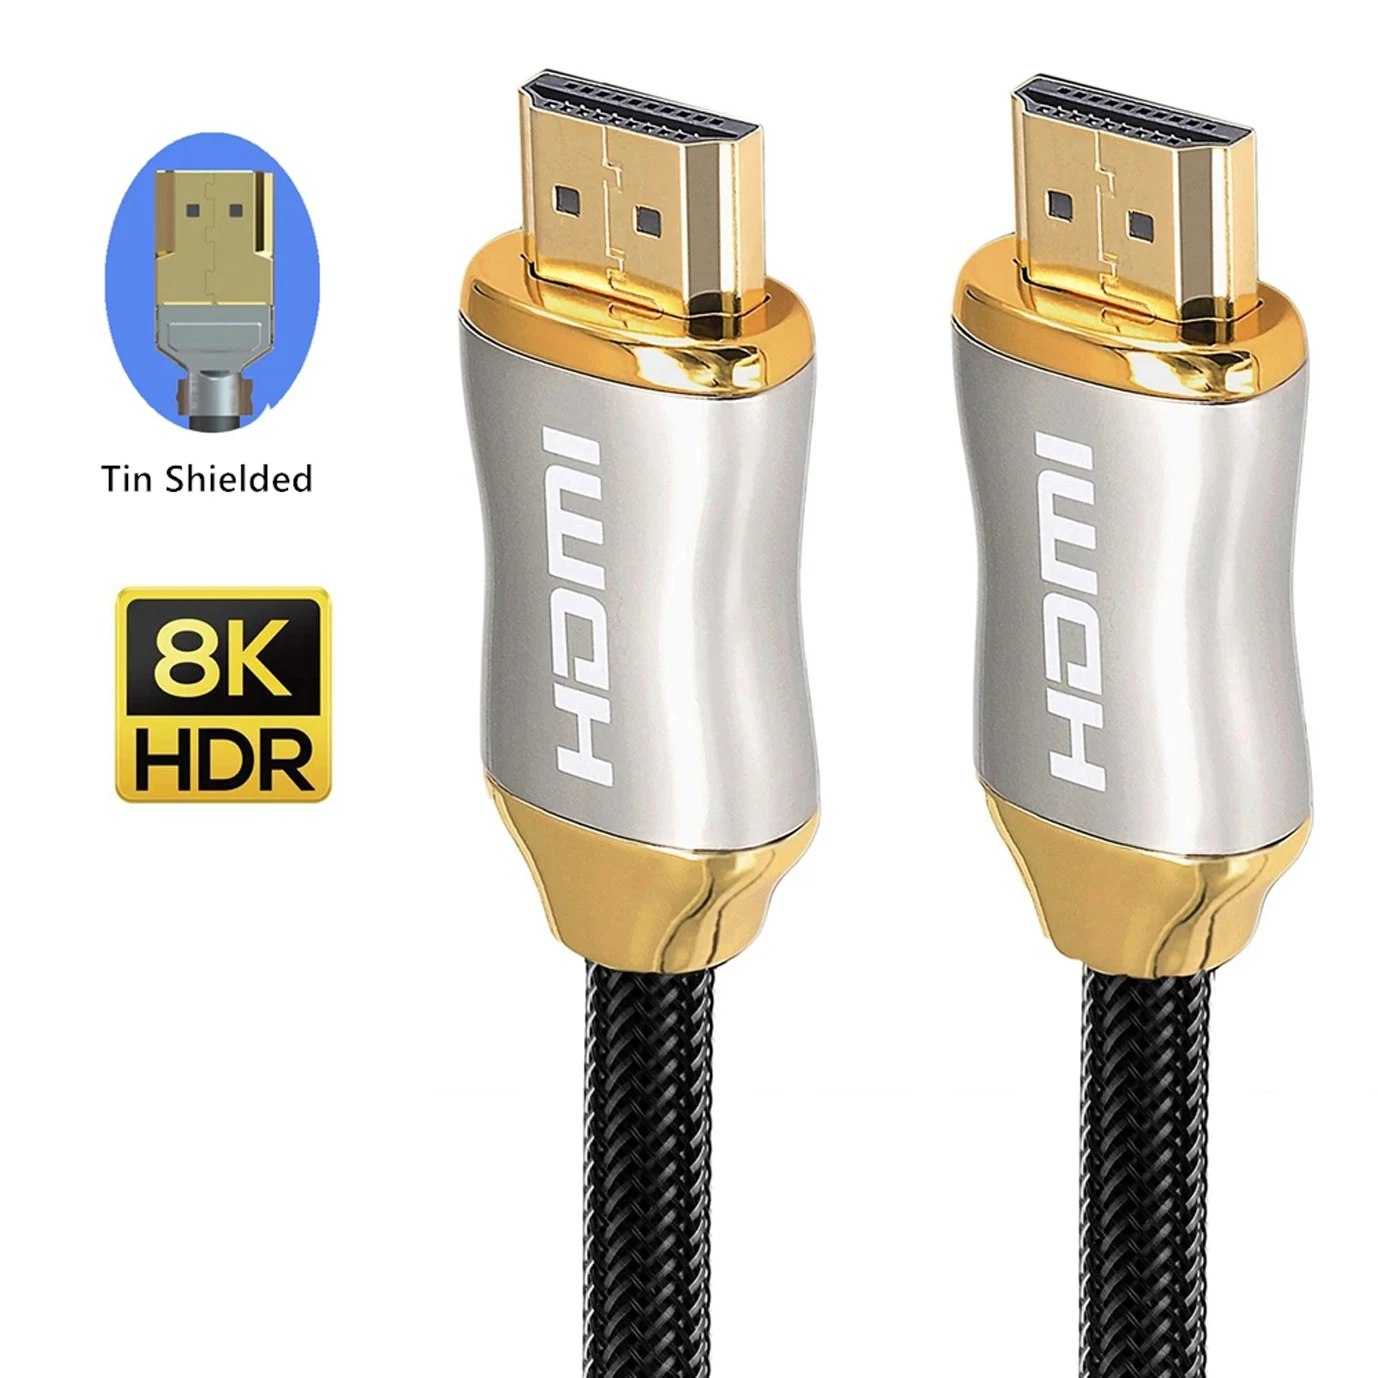 

2021 New idea products 0.5m 1m 2m 3m 8K Hdmi 2.1 cable 4K 120HZ UHD HDR 48Gbps for projectors computer Xiaomi TV xbox series, Black/customized